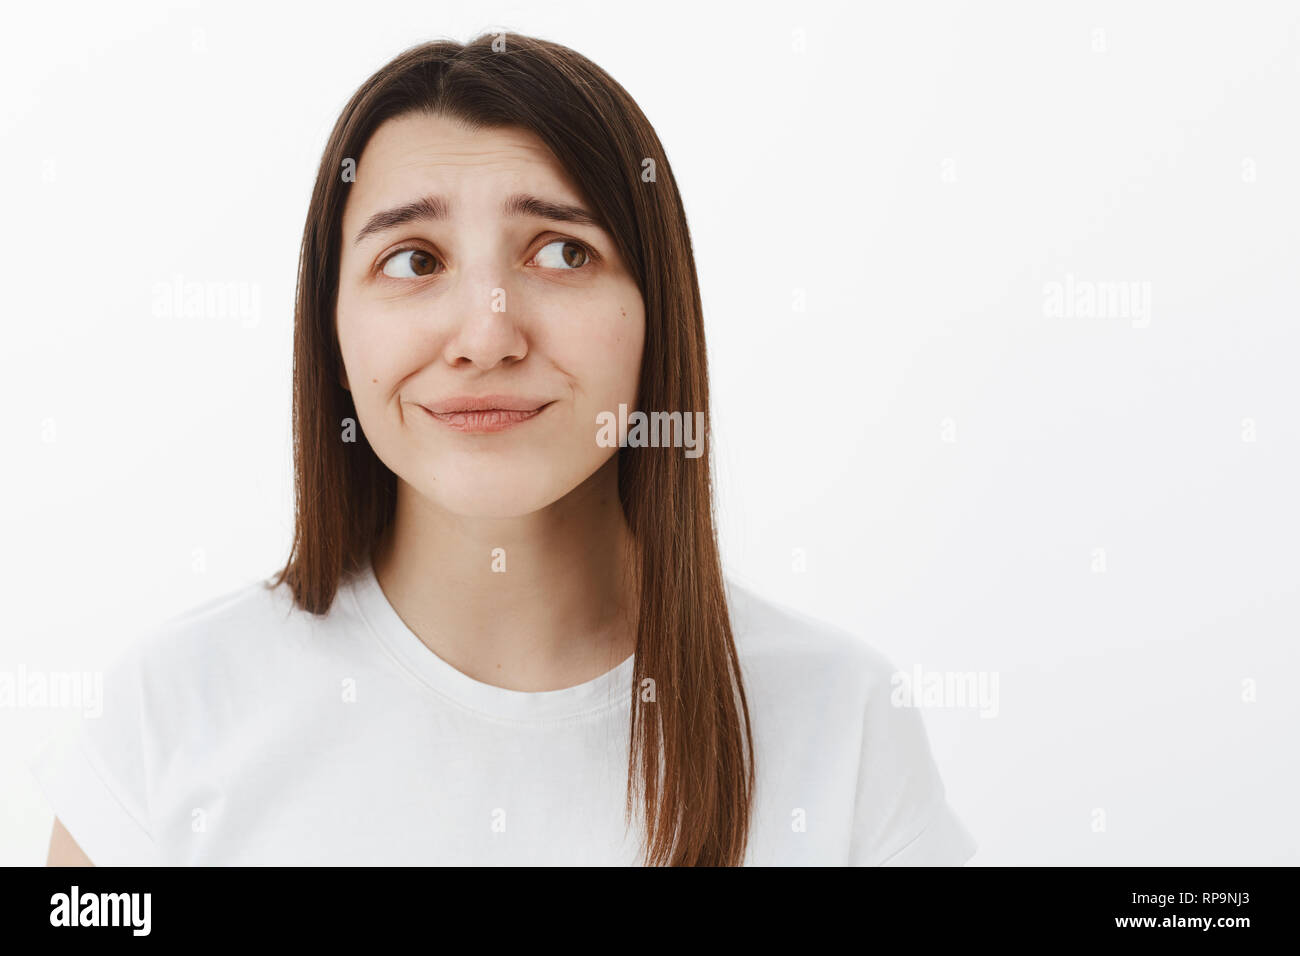 Girl expected different, being displeased and unimpressed smirking disappointed frowning and grimacing from dissatisfaction and aversion, looking away Stock Photo